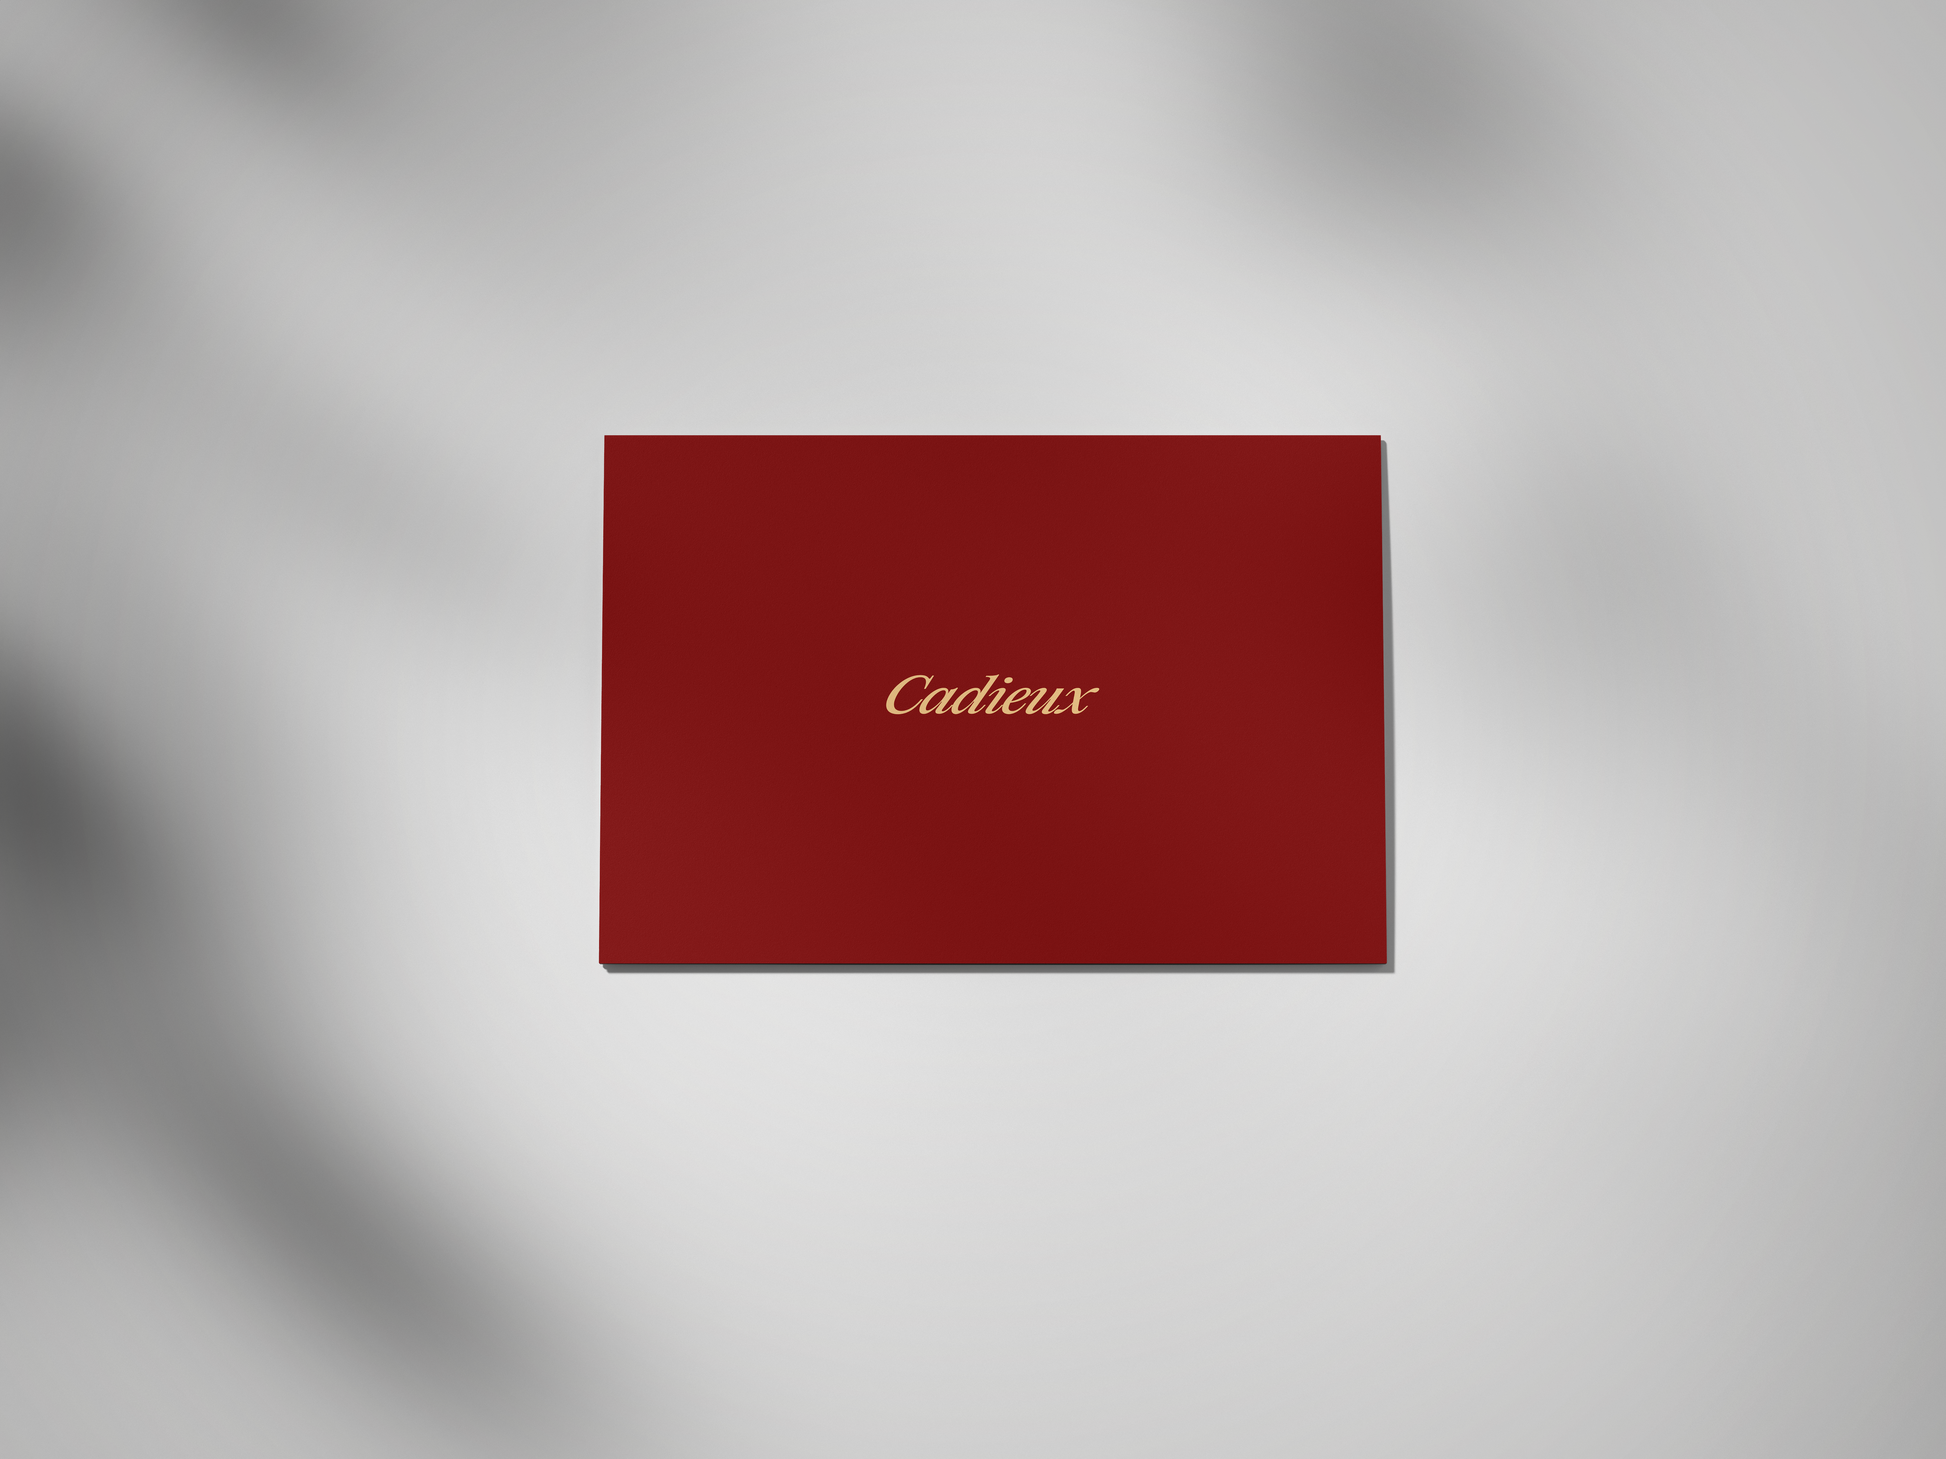 Cadieux Gift Card